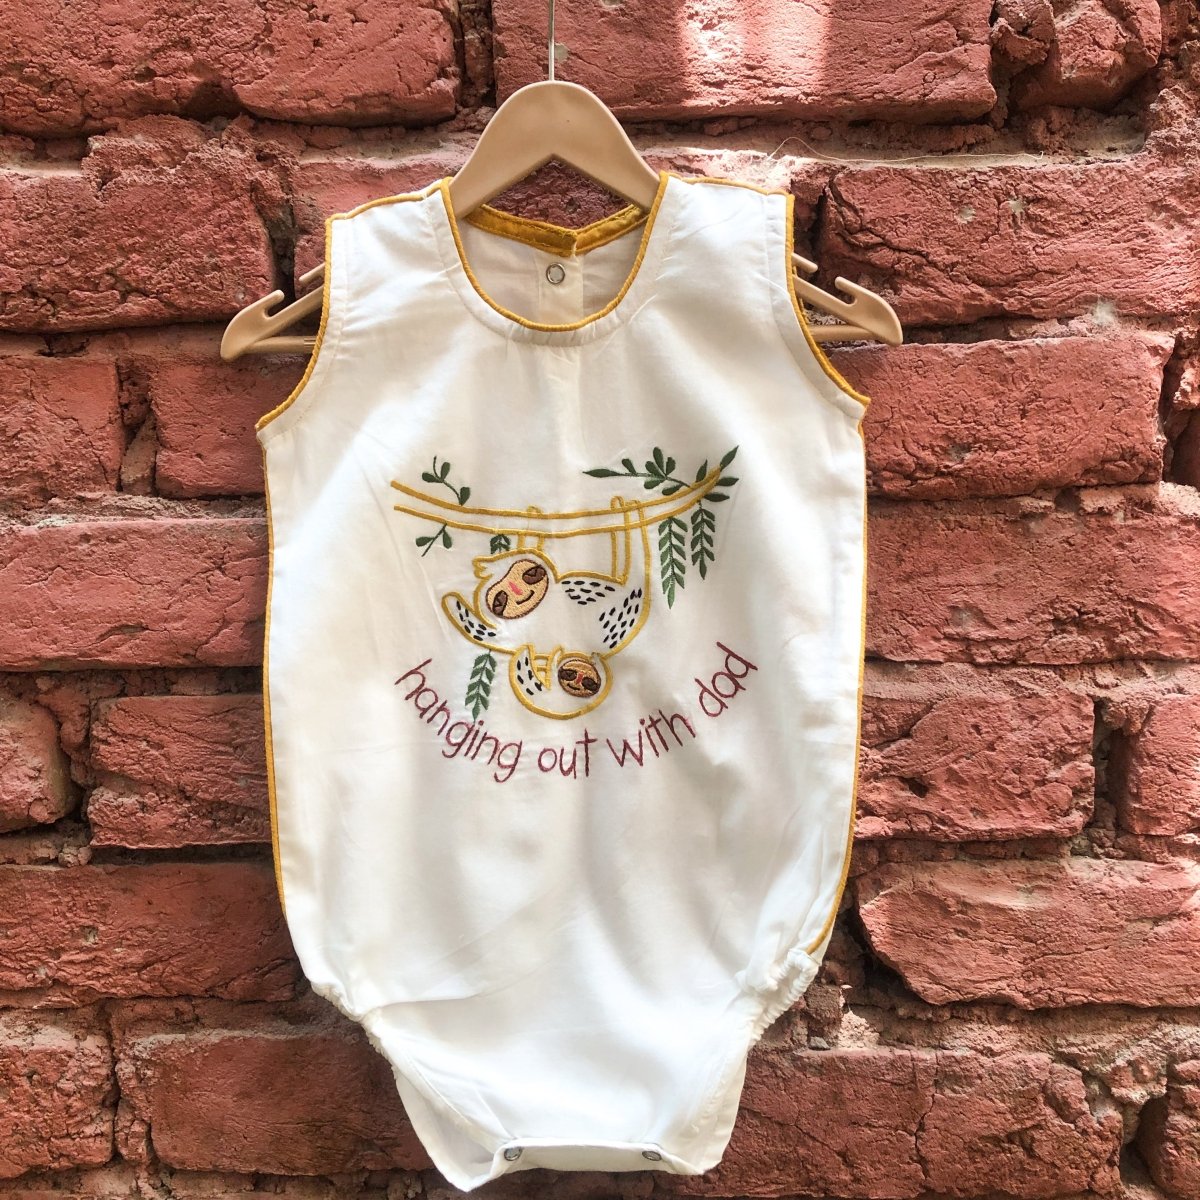 Bhaakur Cotton Romper- Hanging Out With Dad - Romper-Sloth-Voile-0-6M